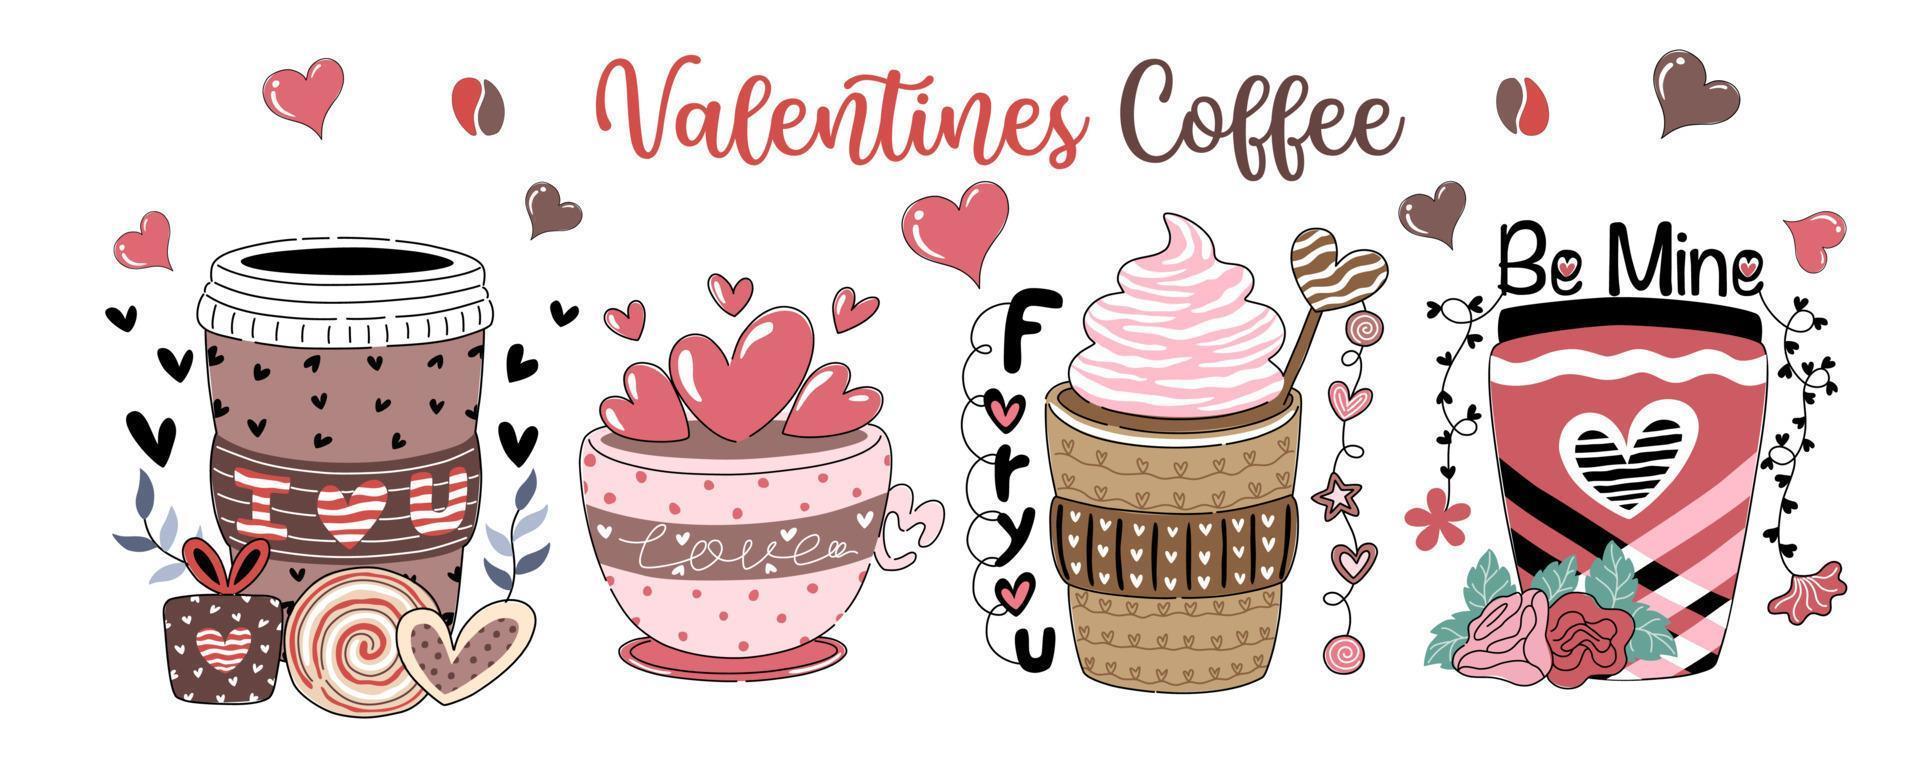 Vector illustration set valentine coffee Designed on a white background for Valentine's Day theme decoration, Valentine's coffee, digital printing, T-shirt design, stickers, bag patterns and more.